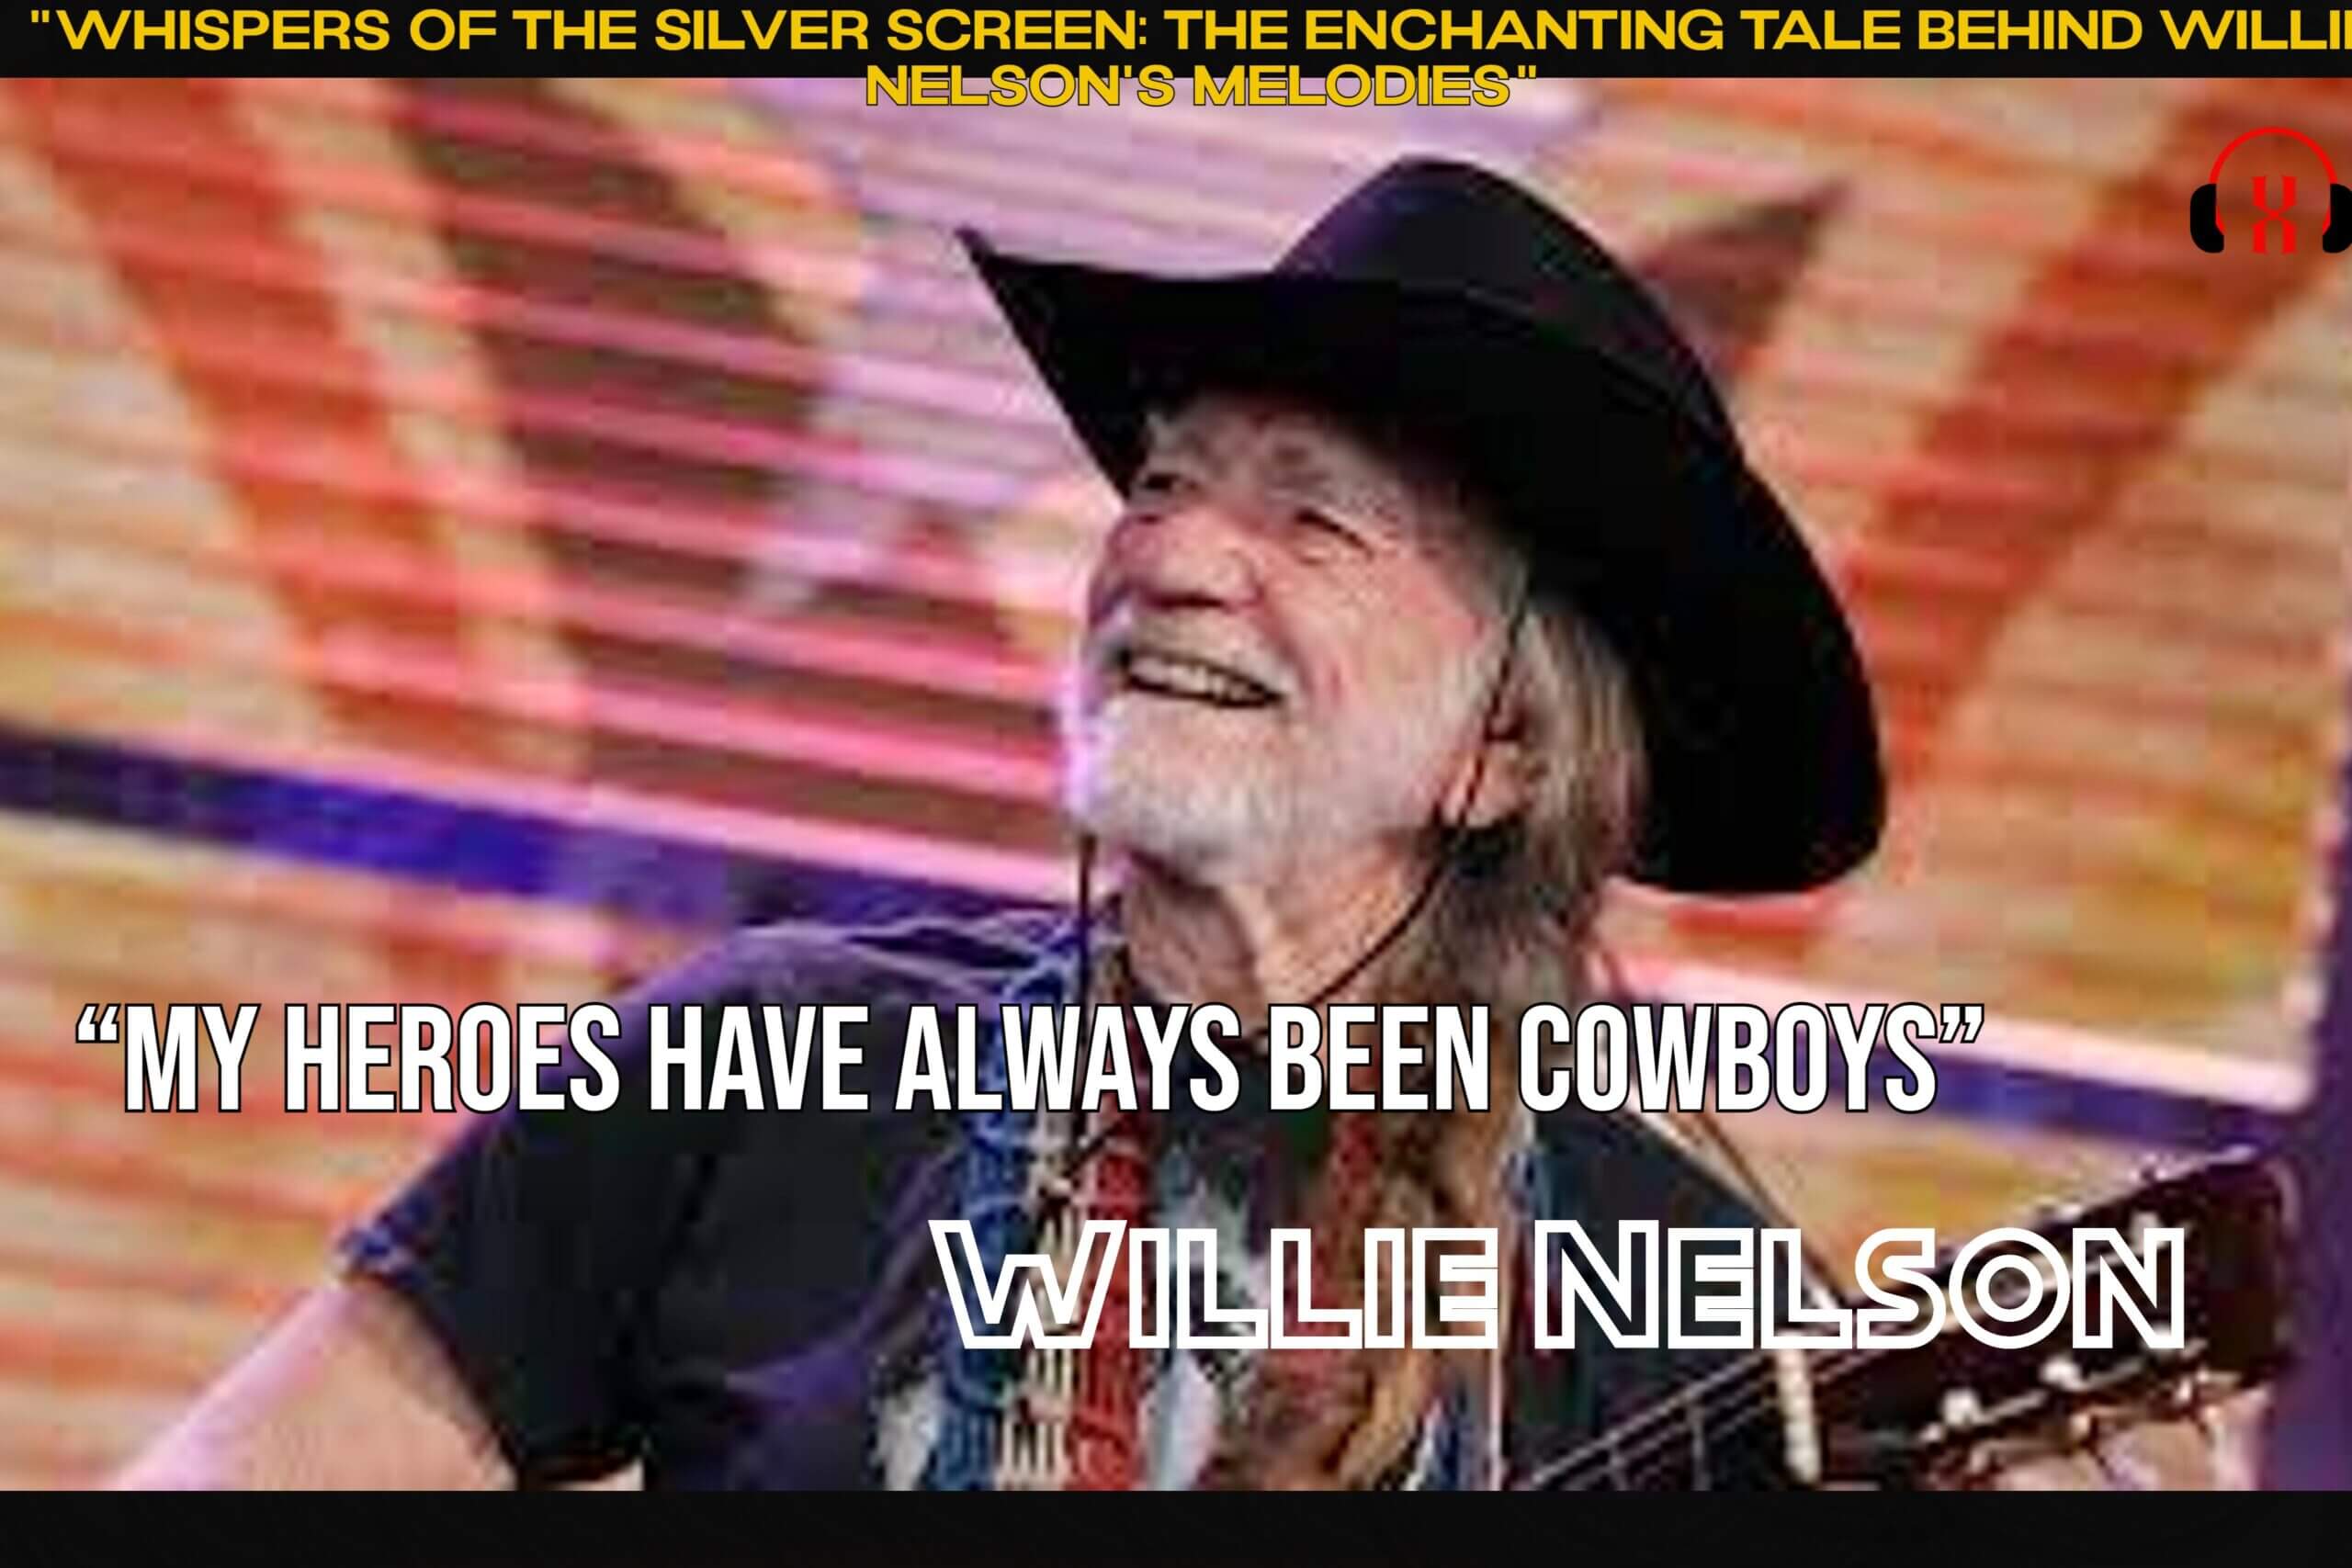 "Whispers of the Silver Screen: The Enchanting Tale Behind Willie Nelson's Melodies"